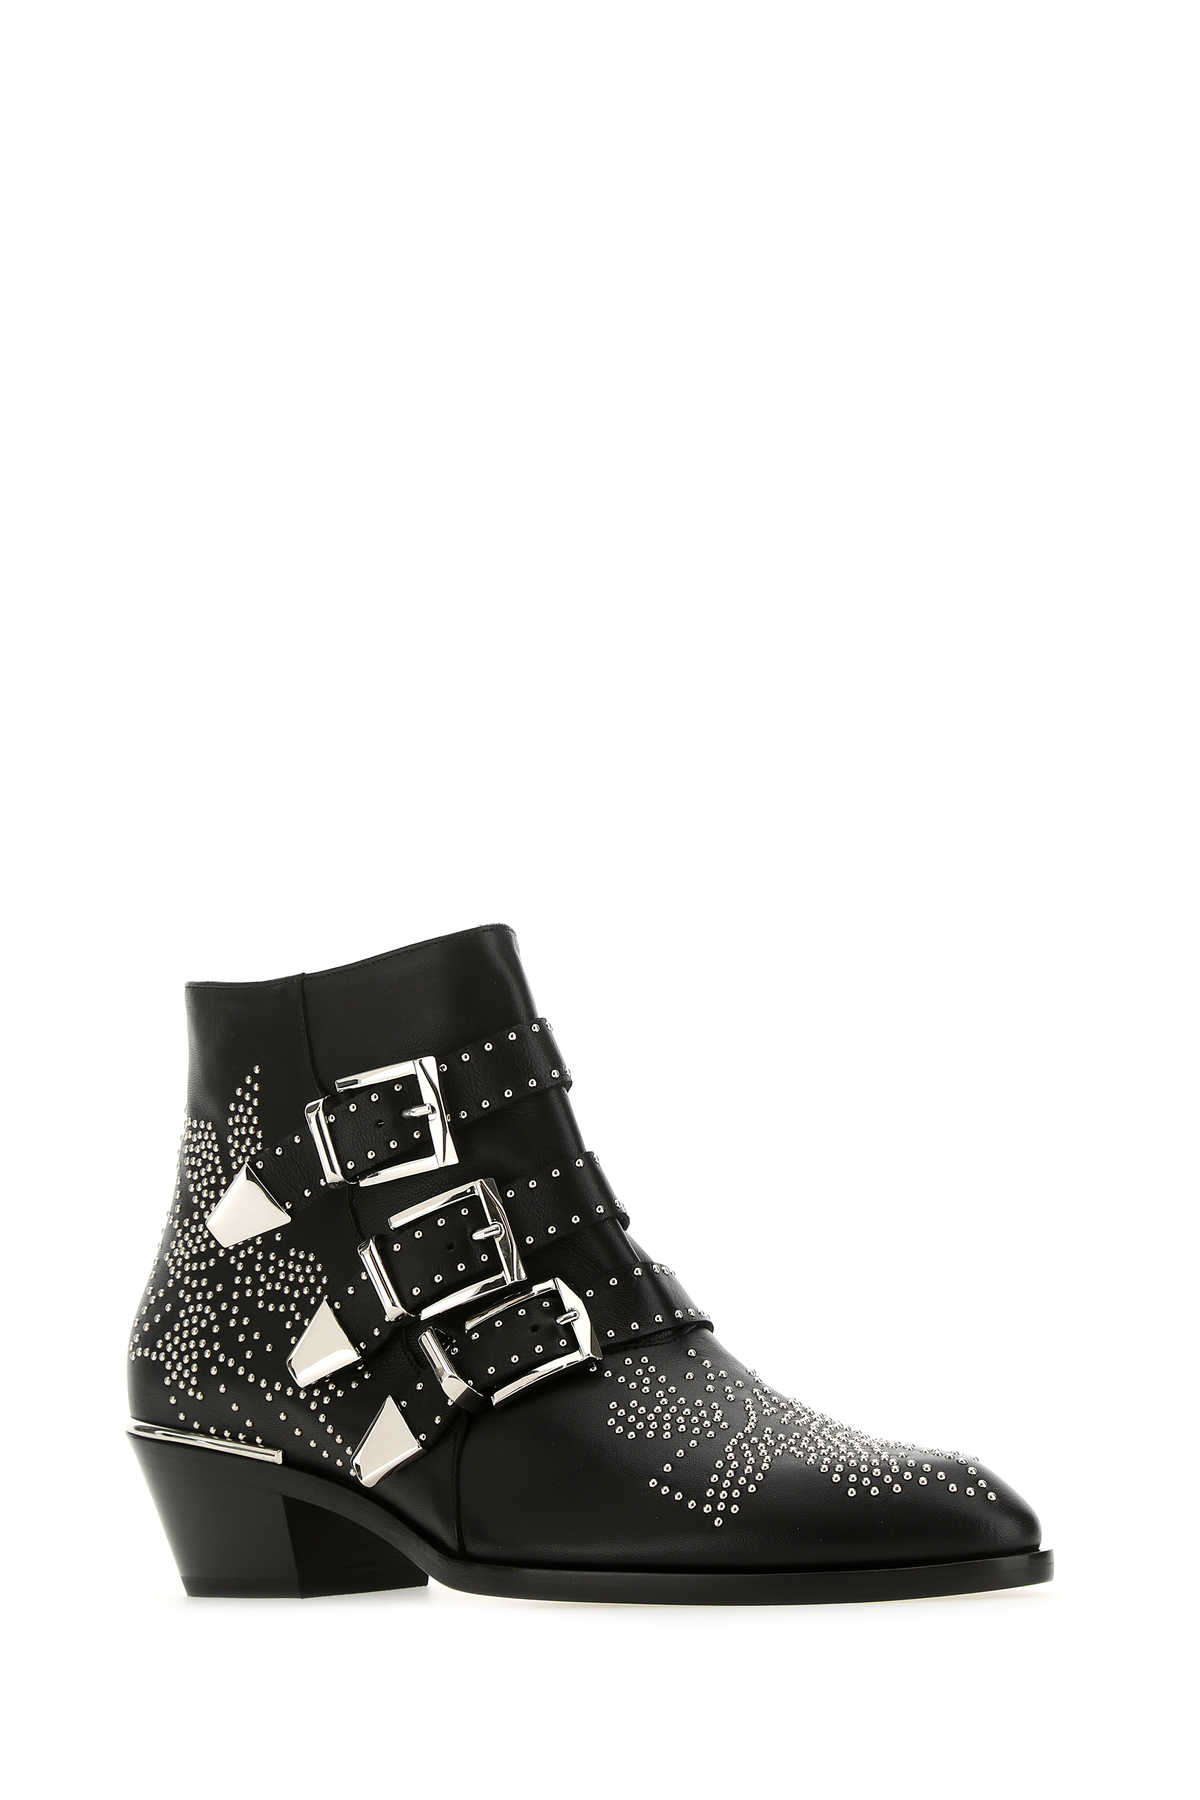 Chloé Embellished Nappa Leather Susanna Ankle Boots In 0zz